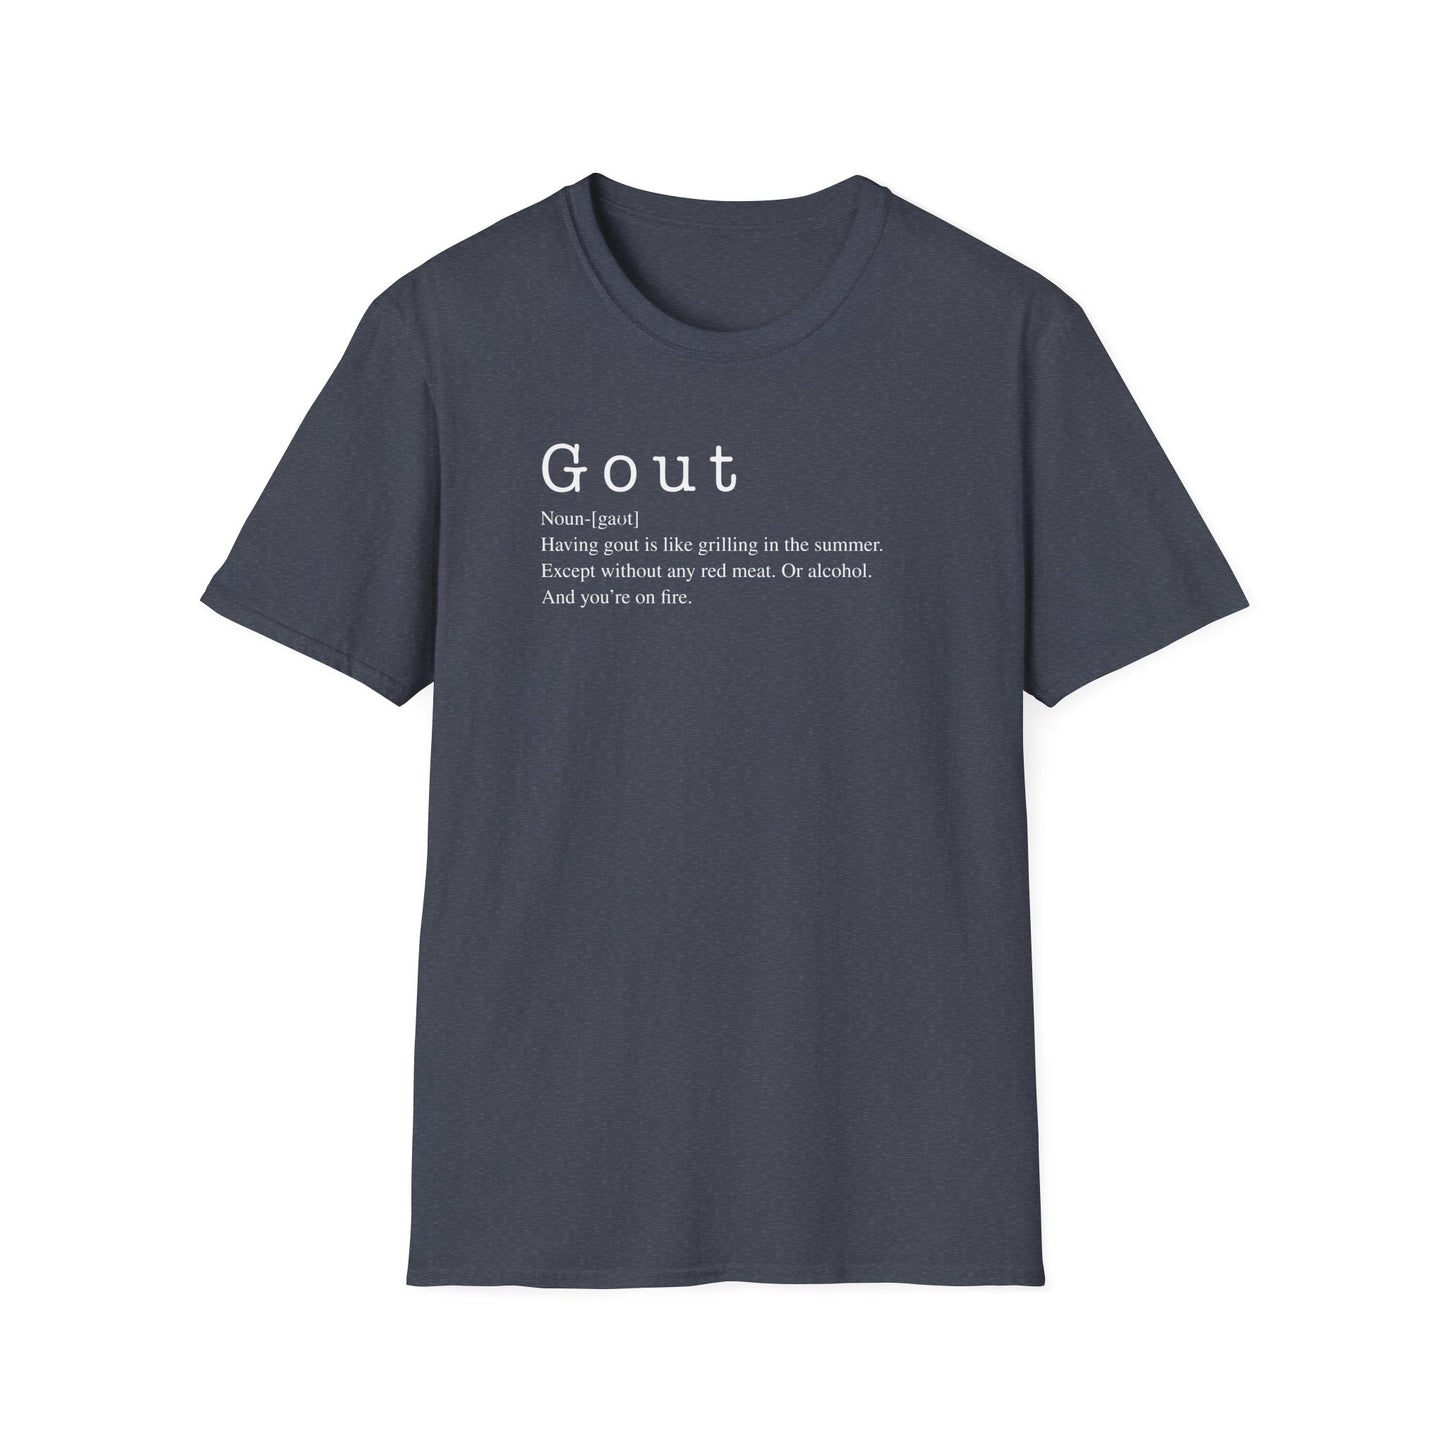 Gout is like...